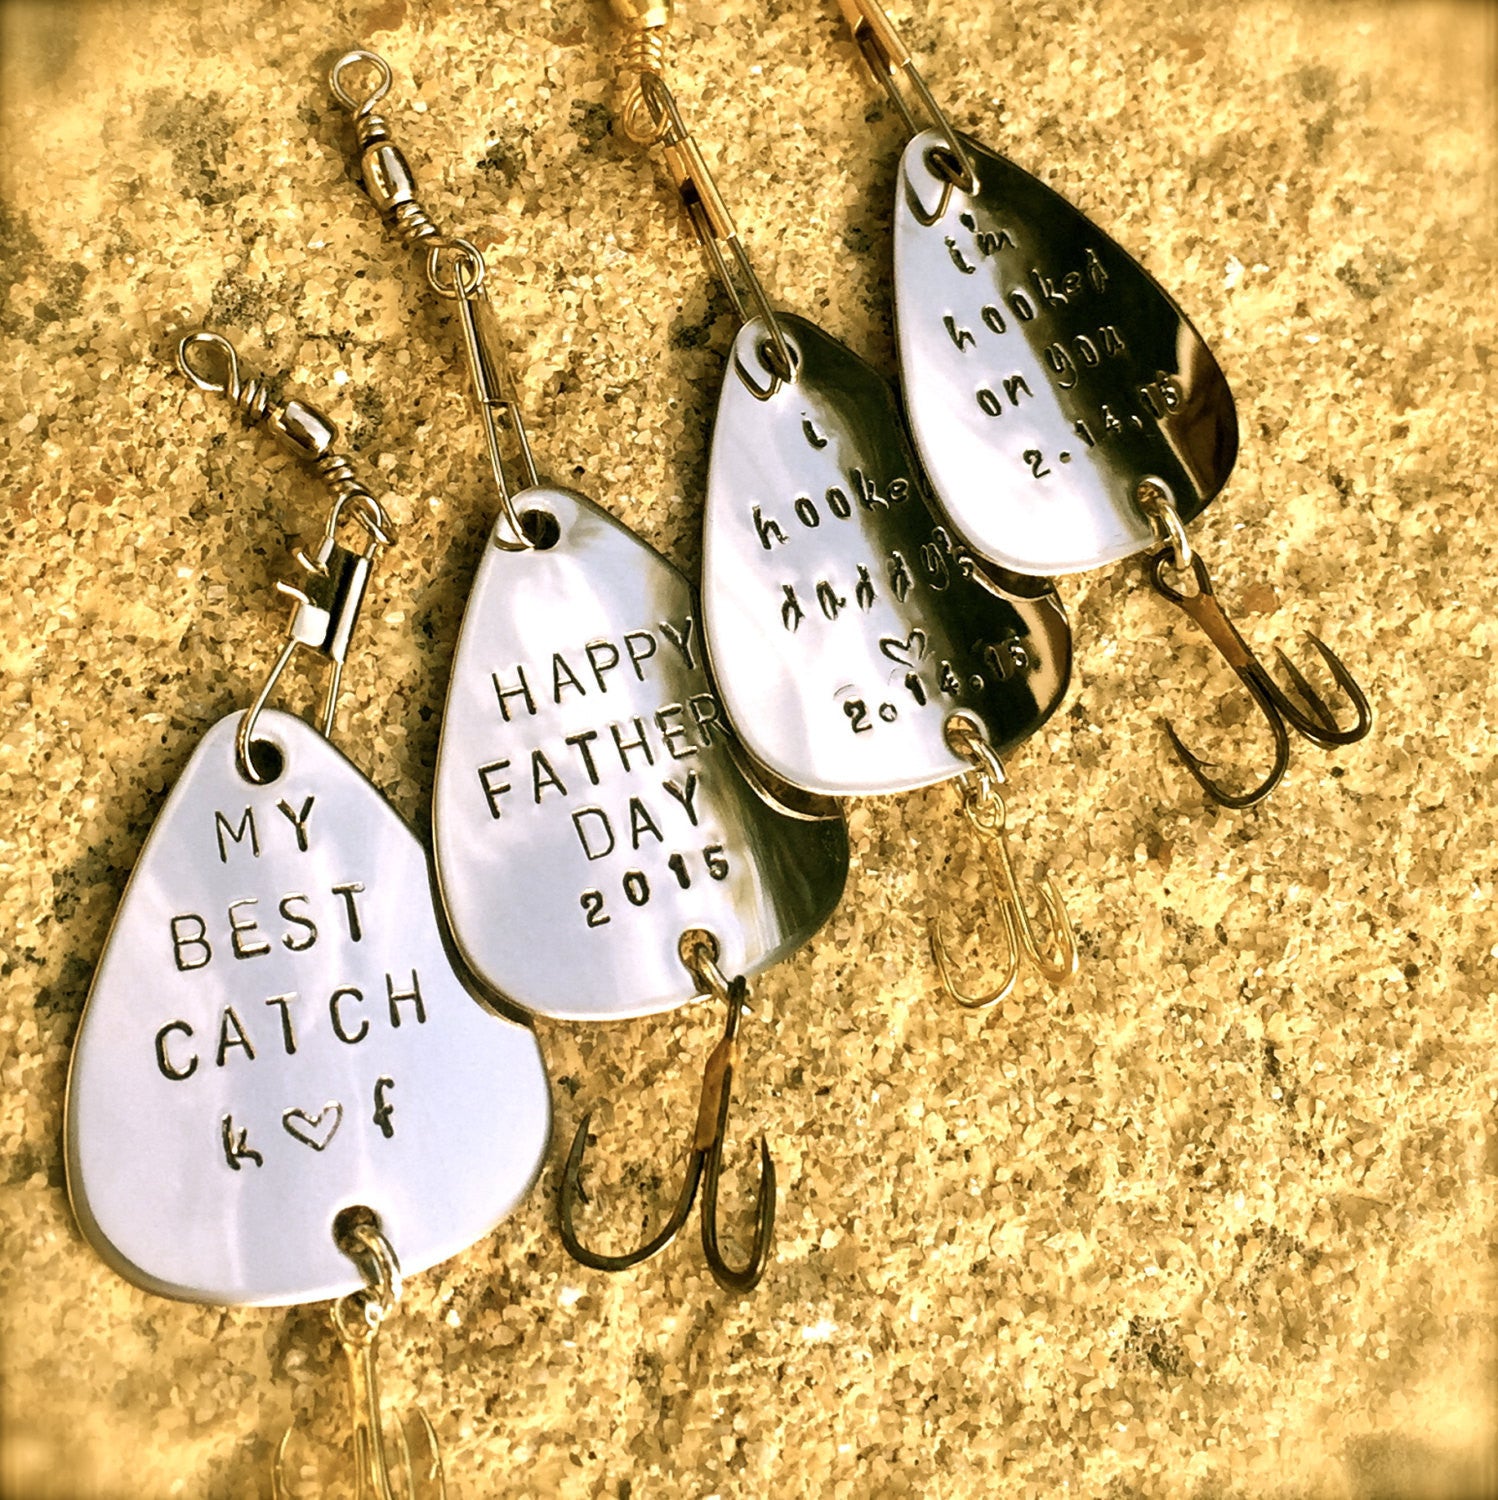 Prom Fishing Lure - Natashaaloha, jewelry, bracelets, necklace, keychains, fishing lures, gifts for men, charms, personalized, 